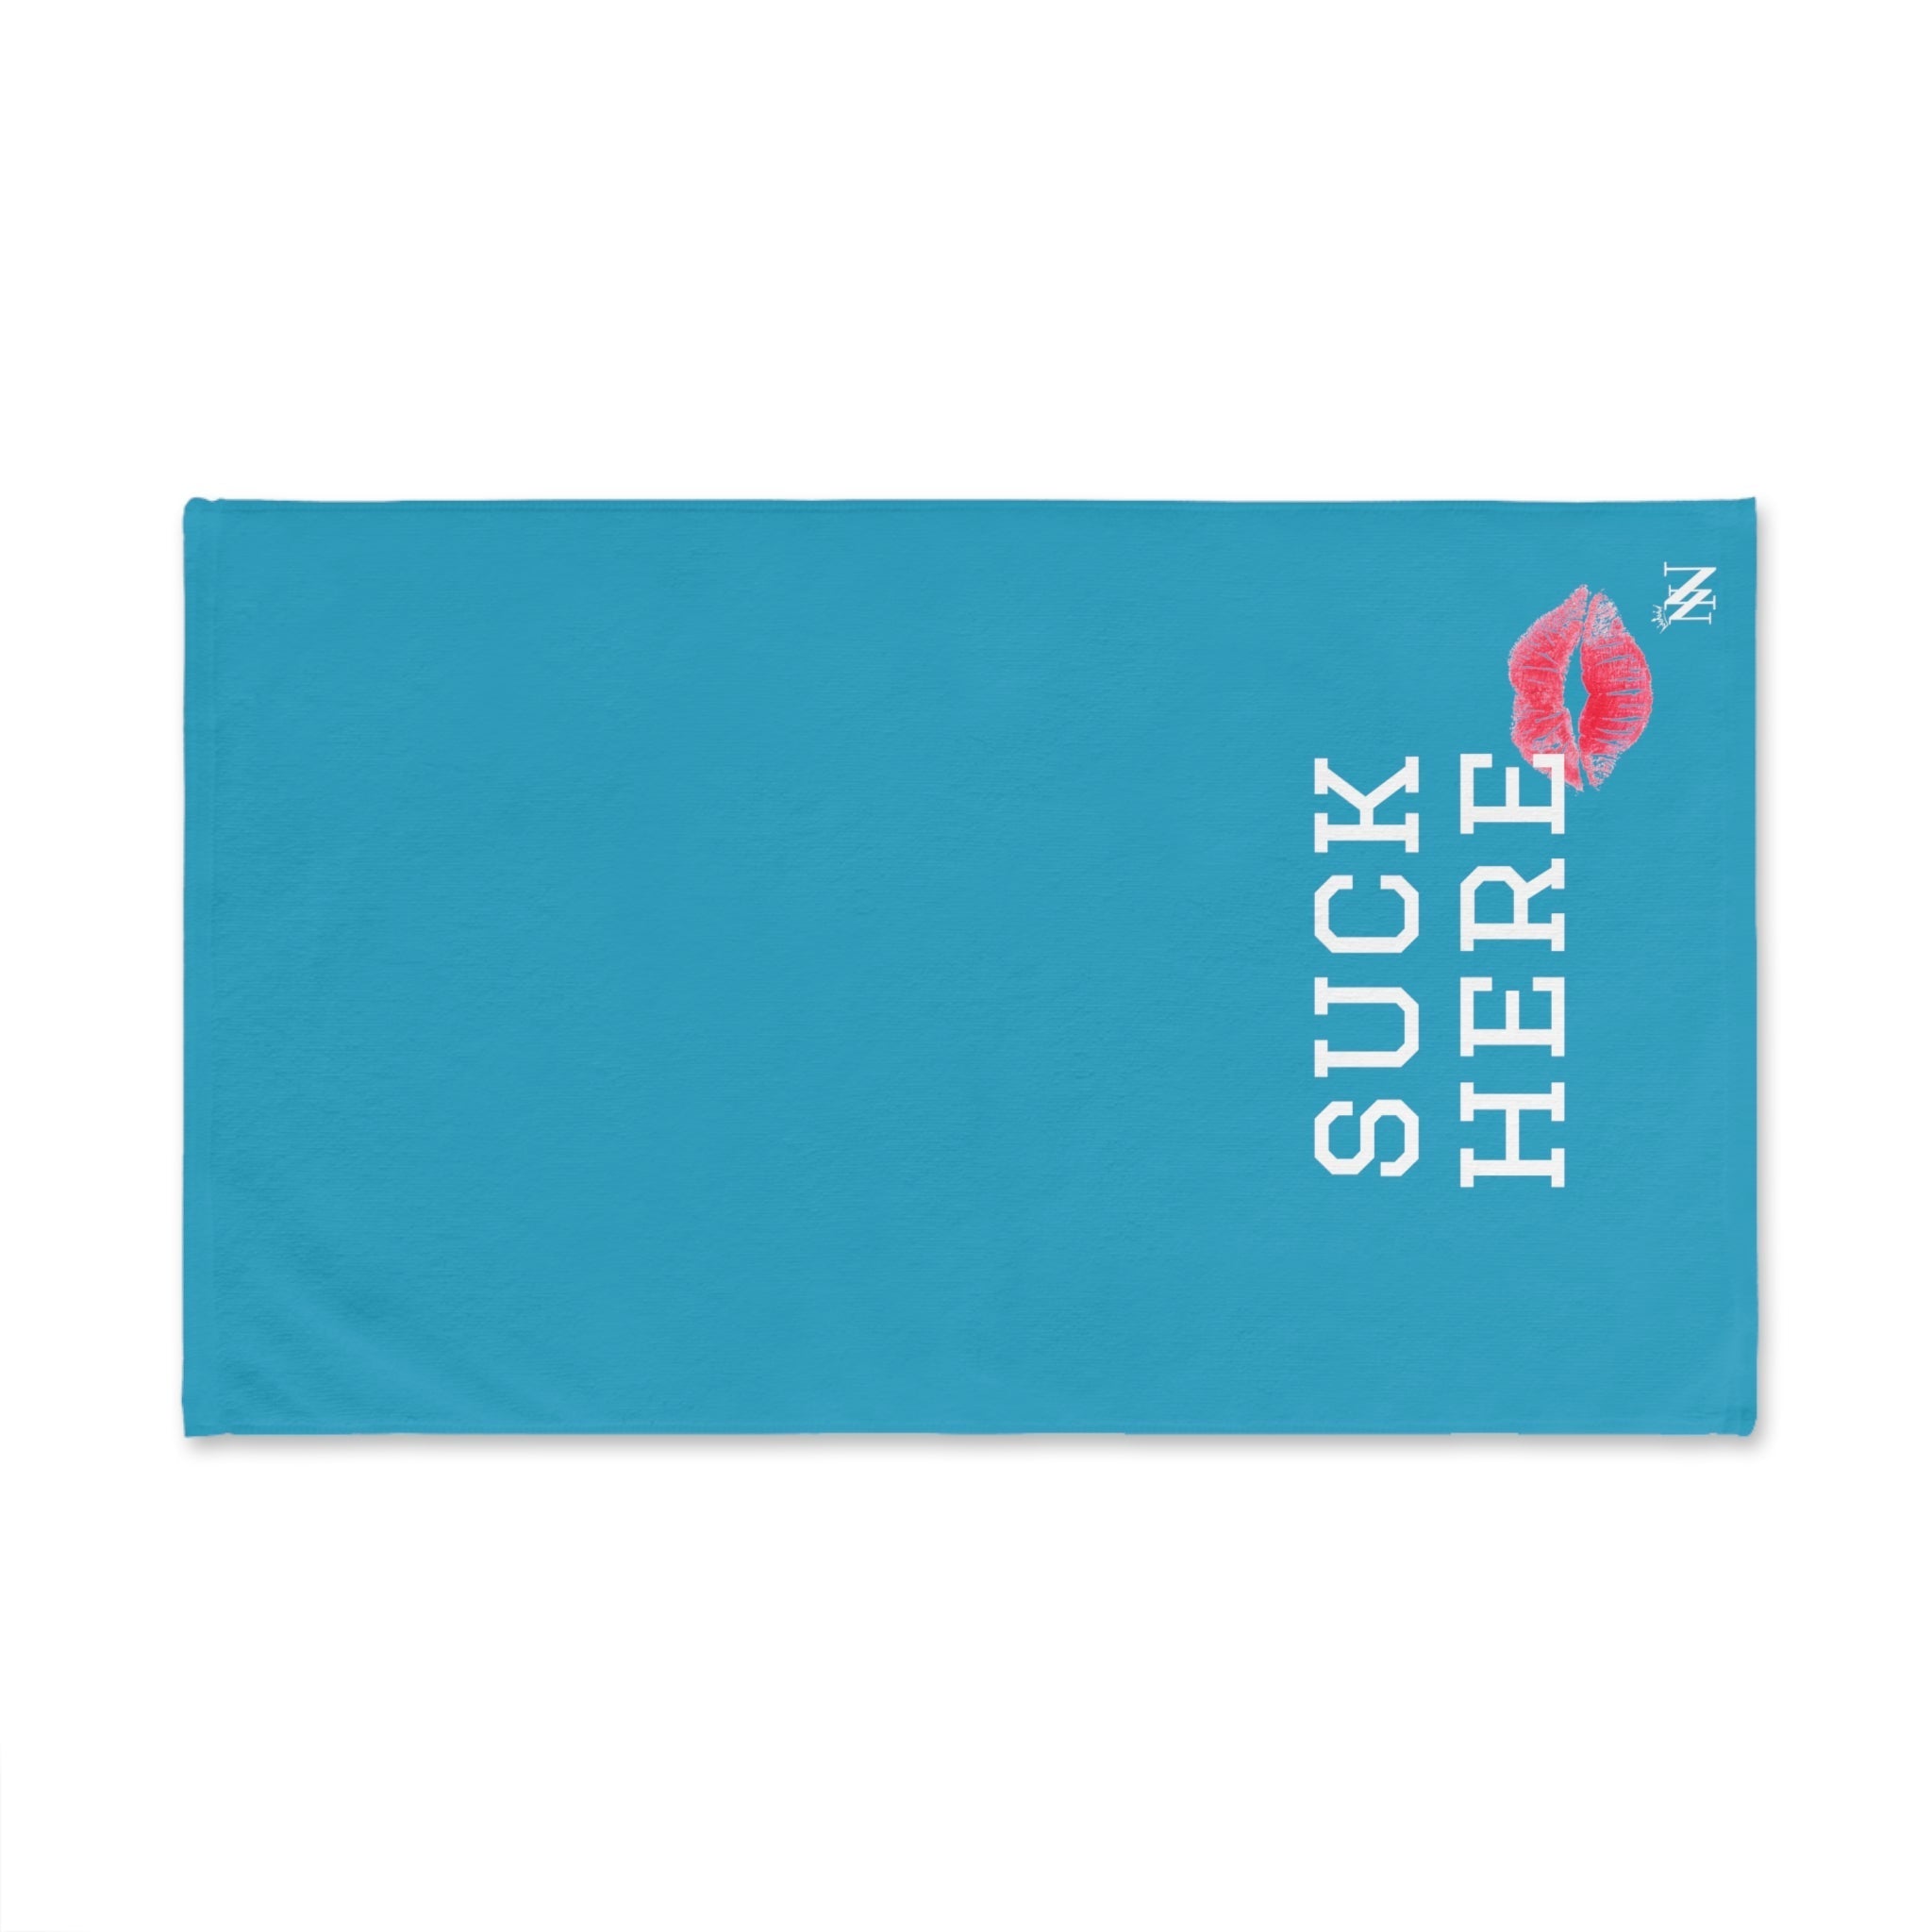 Suck Here Lips Kiss Teal | Novelty Gifts for Boyfriend, Funny Towel Romantic Gift for Wedding Couple Fiance First Year Anniversary Valentines, Party Gag Gifts, Joke Humor Cloth for Husband Men BF NECTAR NAPKINS